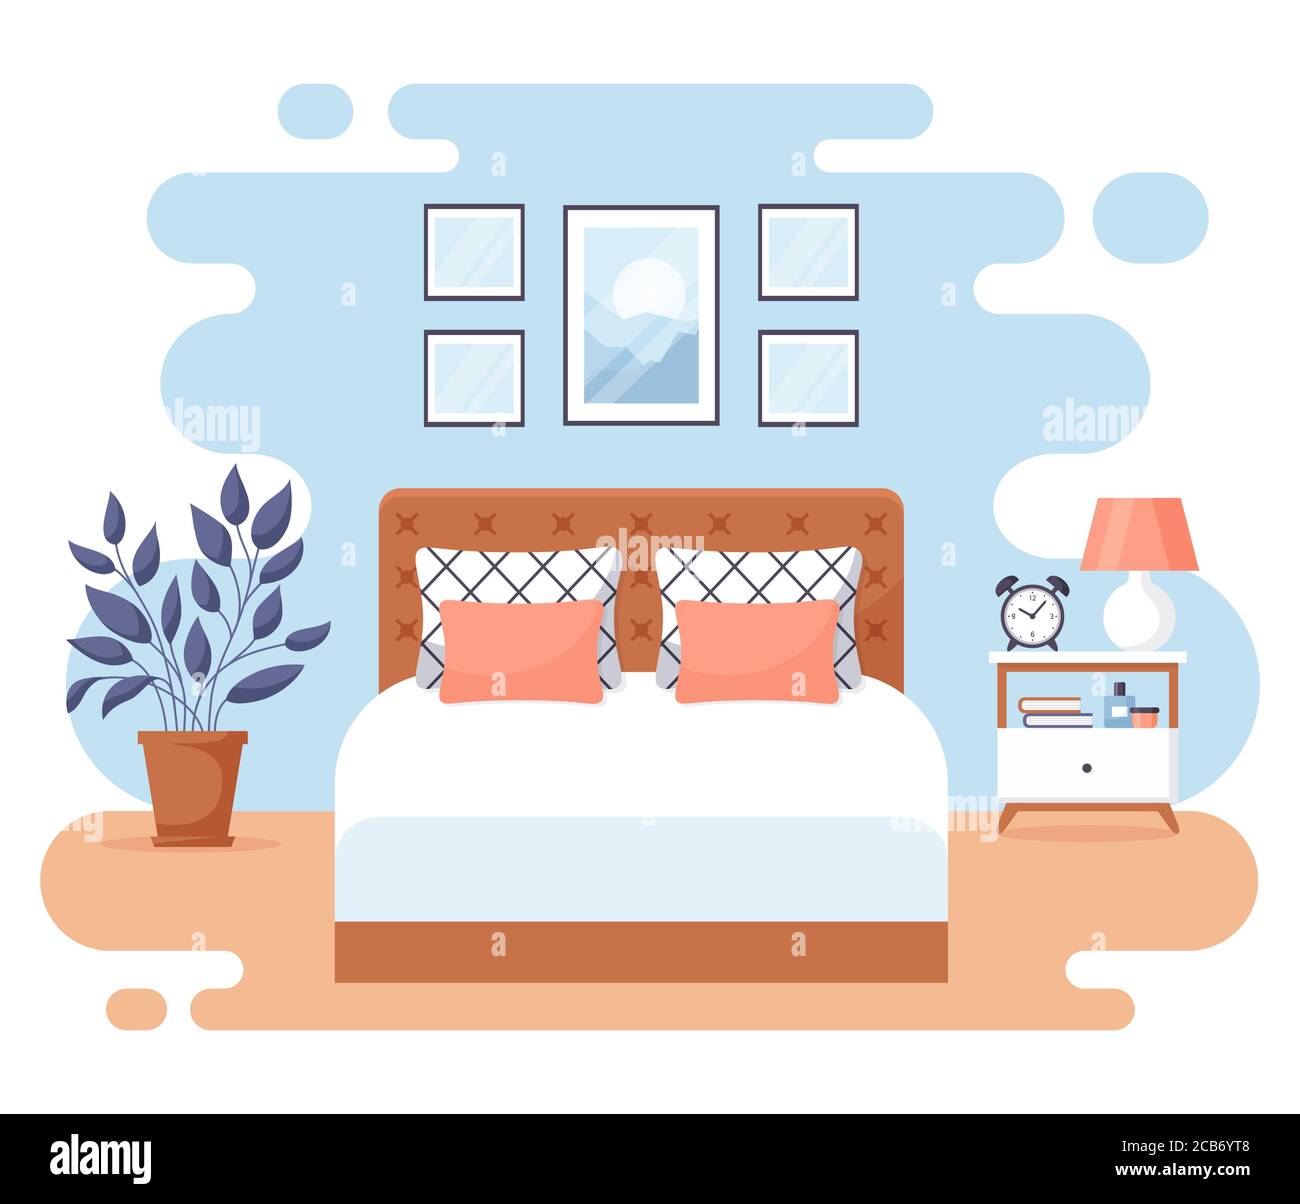 Bedroom interior. Modern banner. Vector. Design of a cozy room with double bed, bedside table, and decor accessories. Home or hotel furnishings. Flat Stock Vector